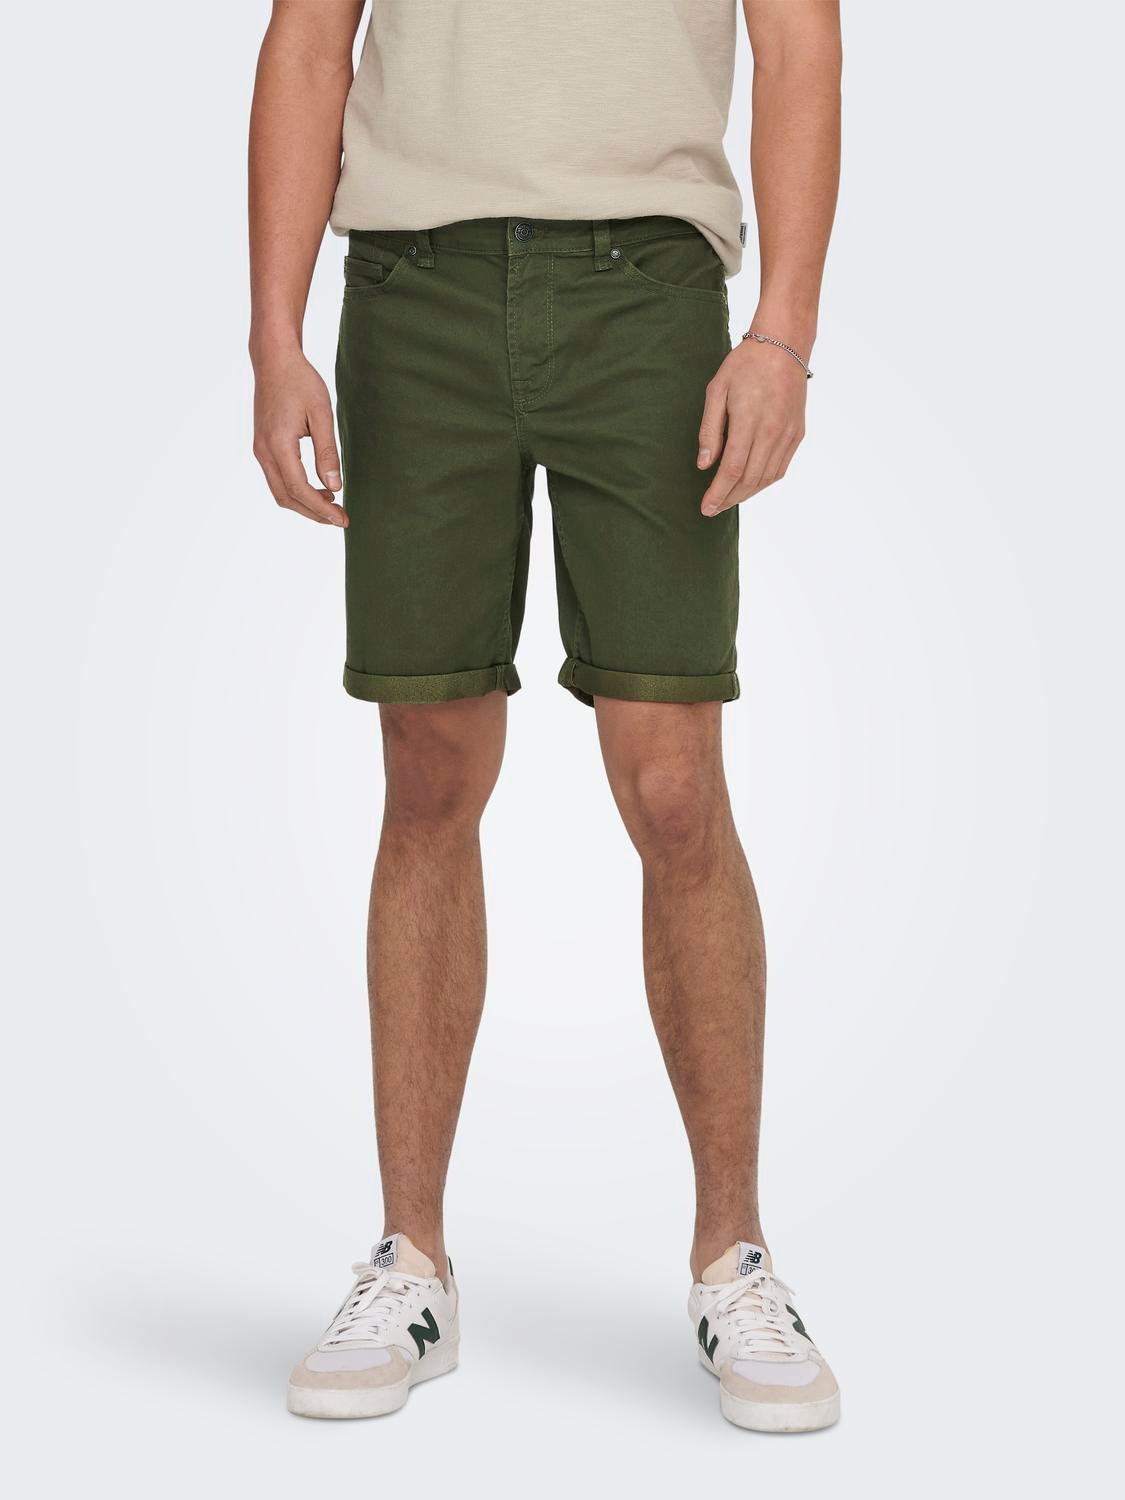 ONLY & SONS Regular Fit Shorts -Olive Night - 22024451